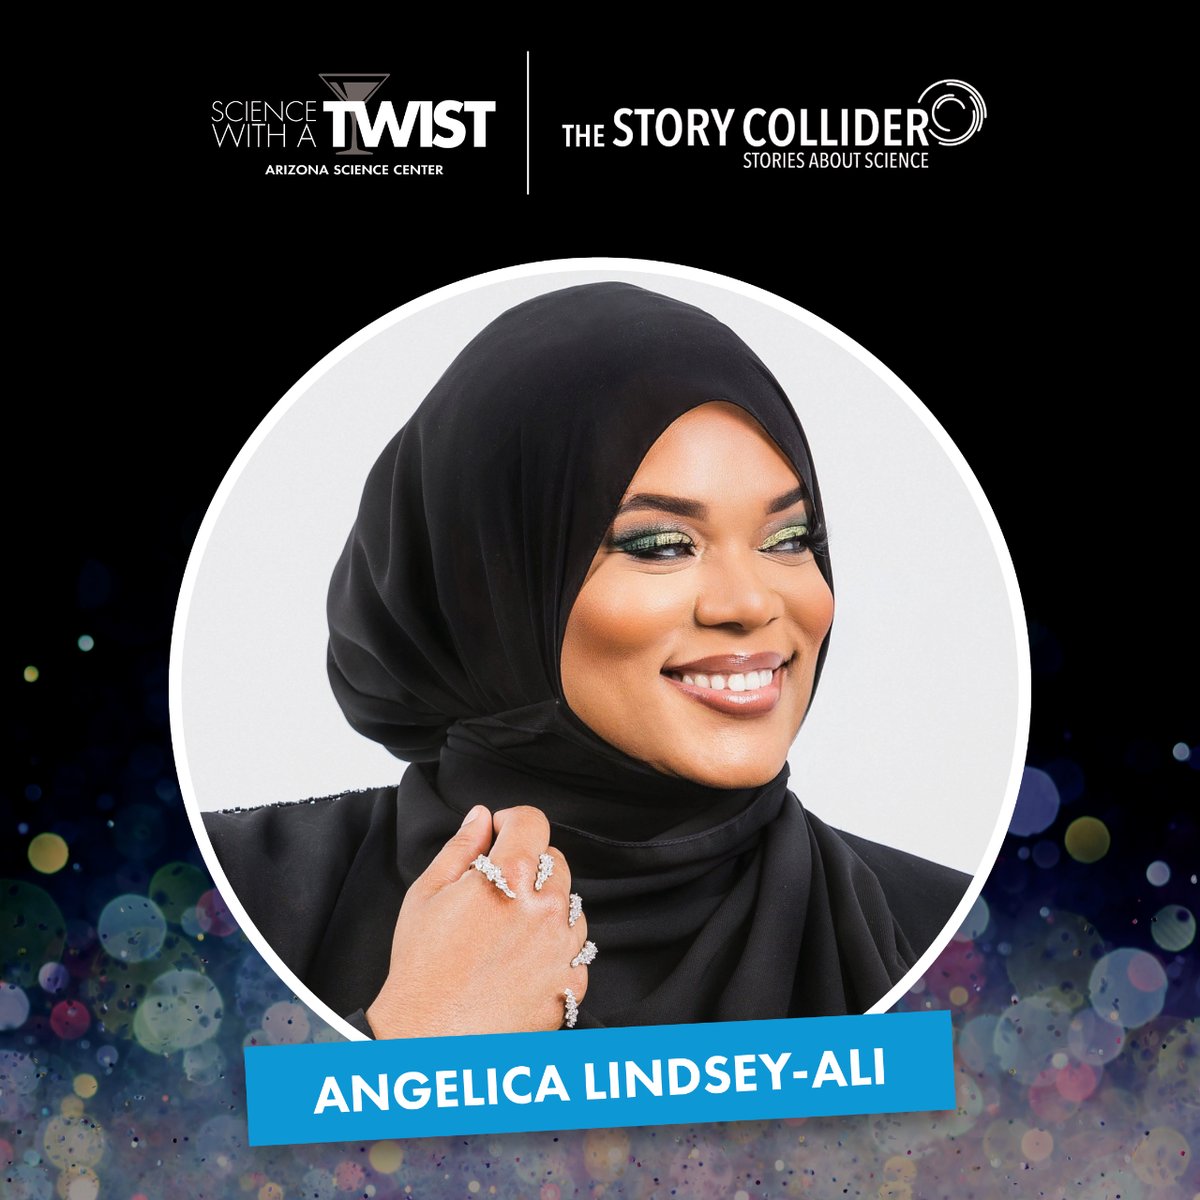 Meet Angelica Lindsey-Ali—Detroit-born, dancer, writer, and Afrofuturist, she's a cultural activist who's journeyed the globe, spreading inspiration. Catch her as a featured storyteller at Arizona Science Center's Science With a TWIST on April 26 🍸 azscience.org/swat